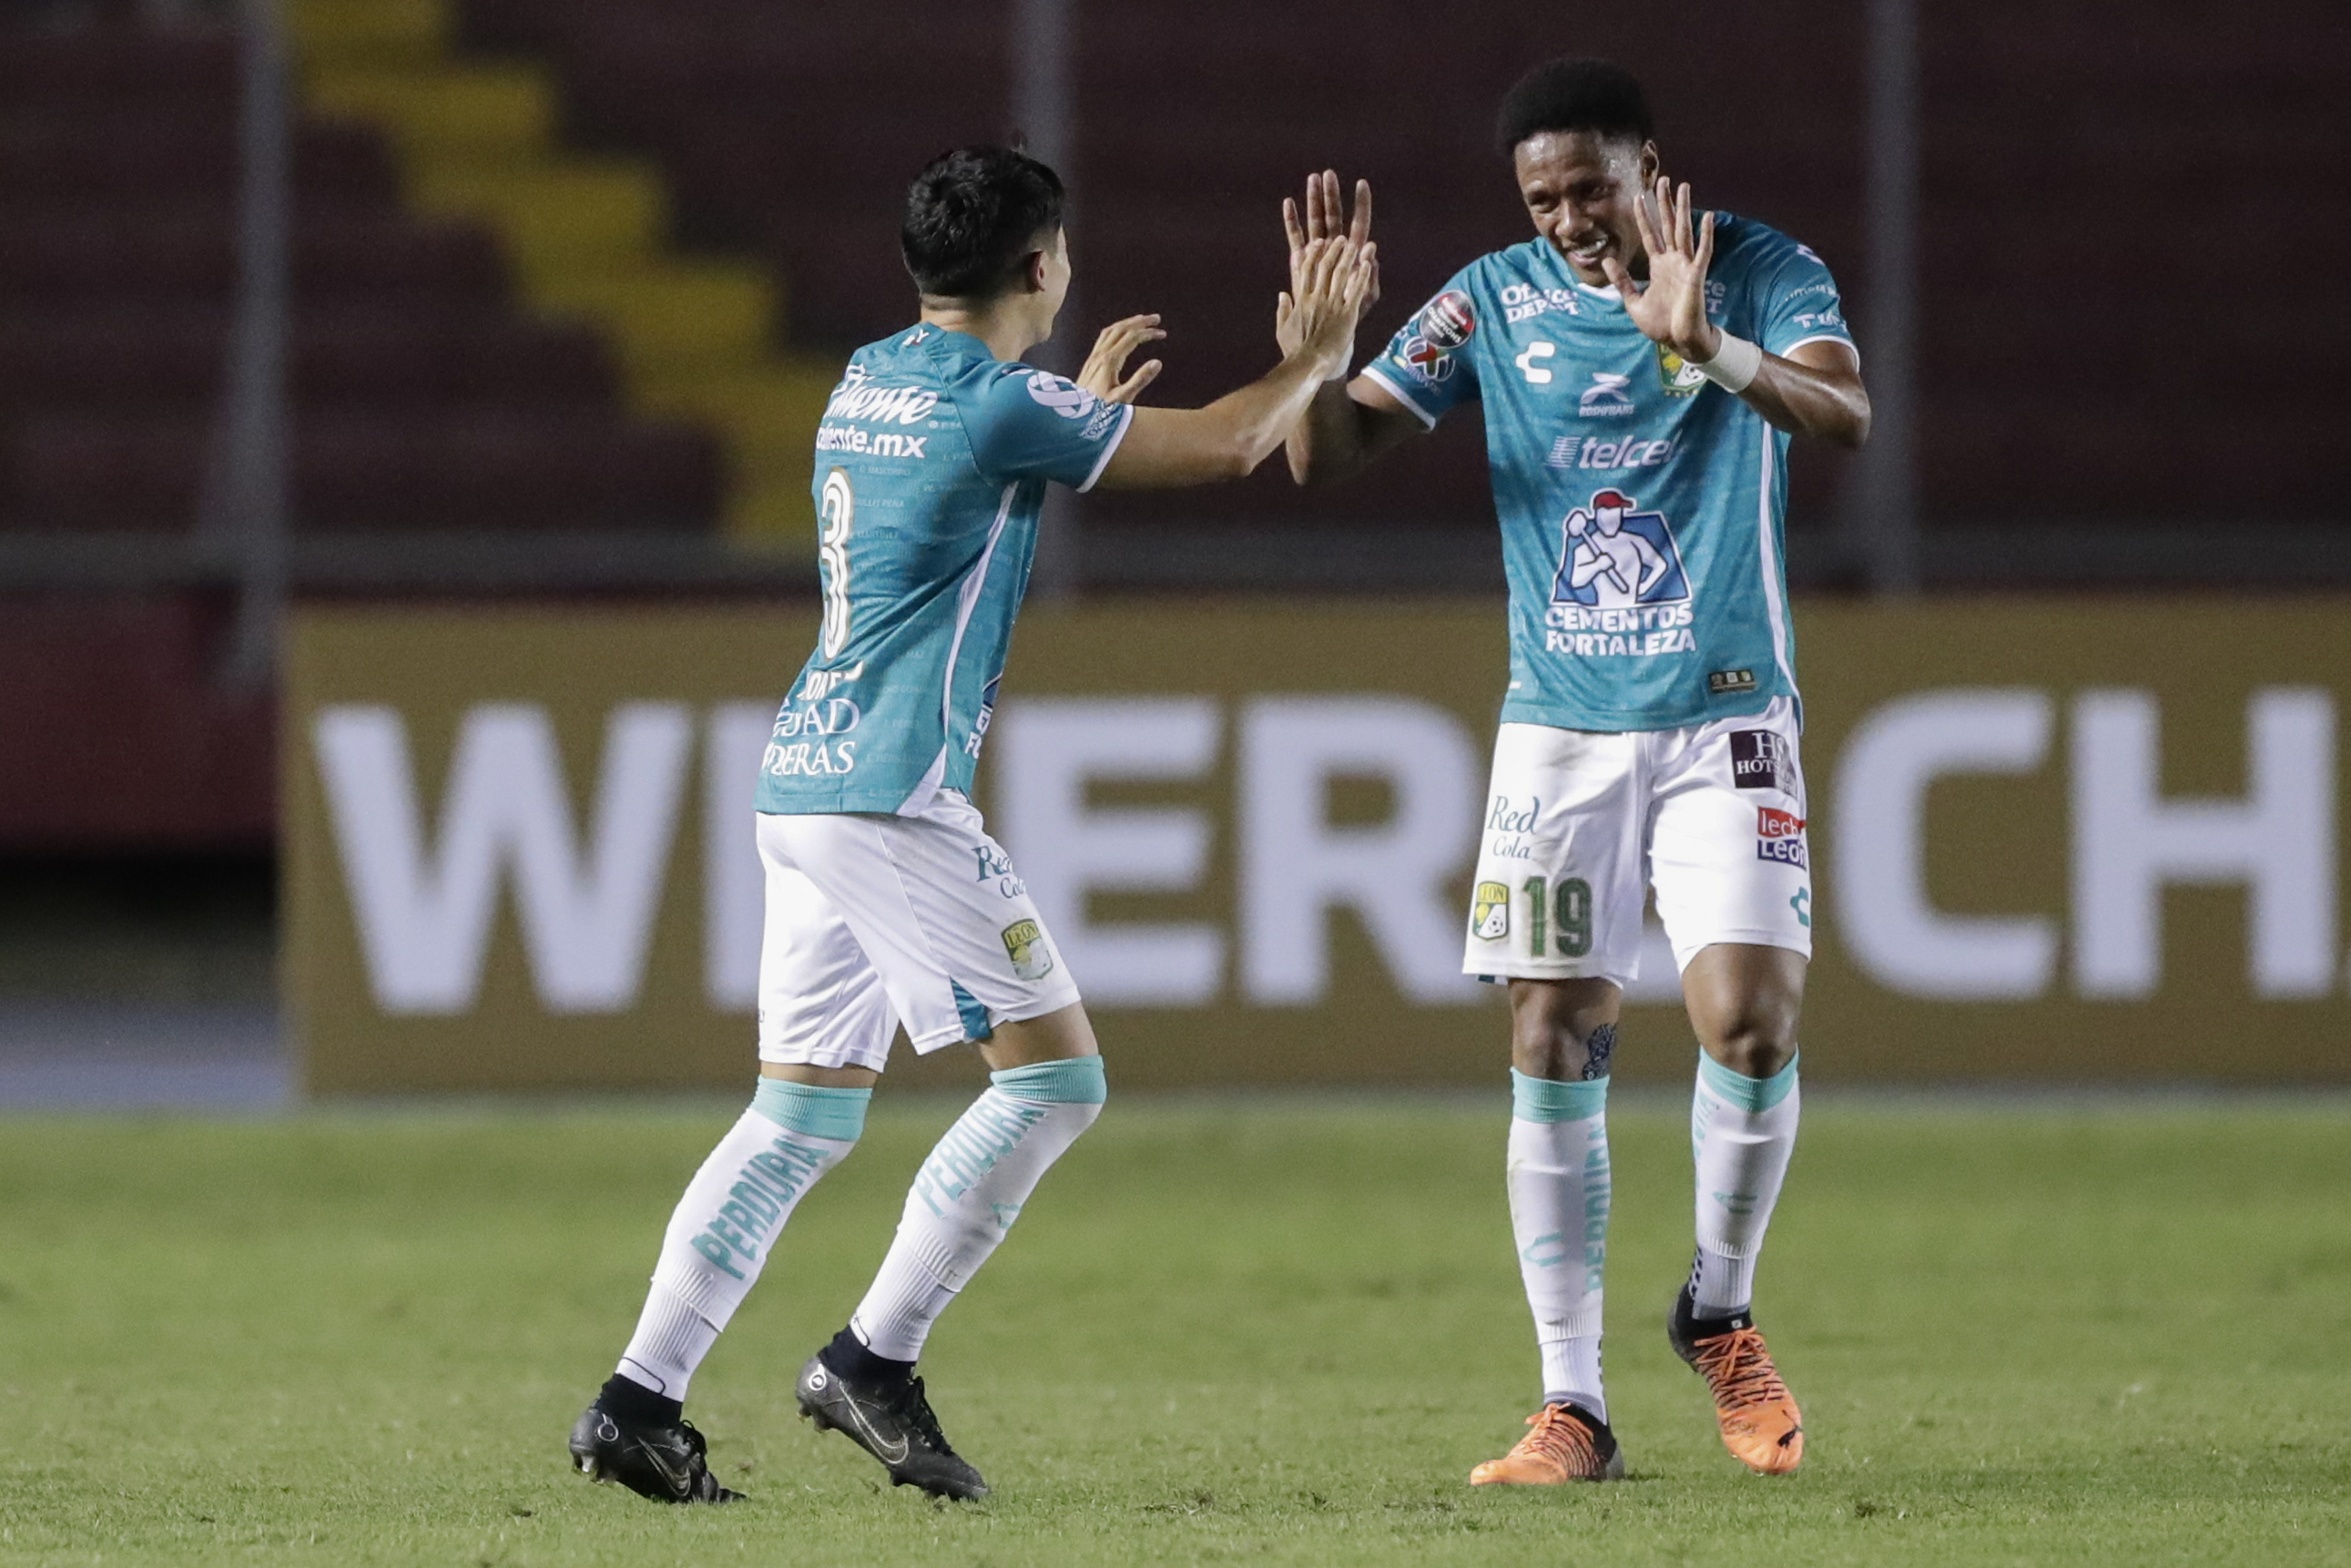 Liga MX clubs' worst results in the CONCACAF Champions League - AS USA